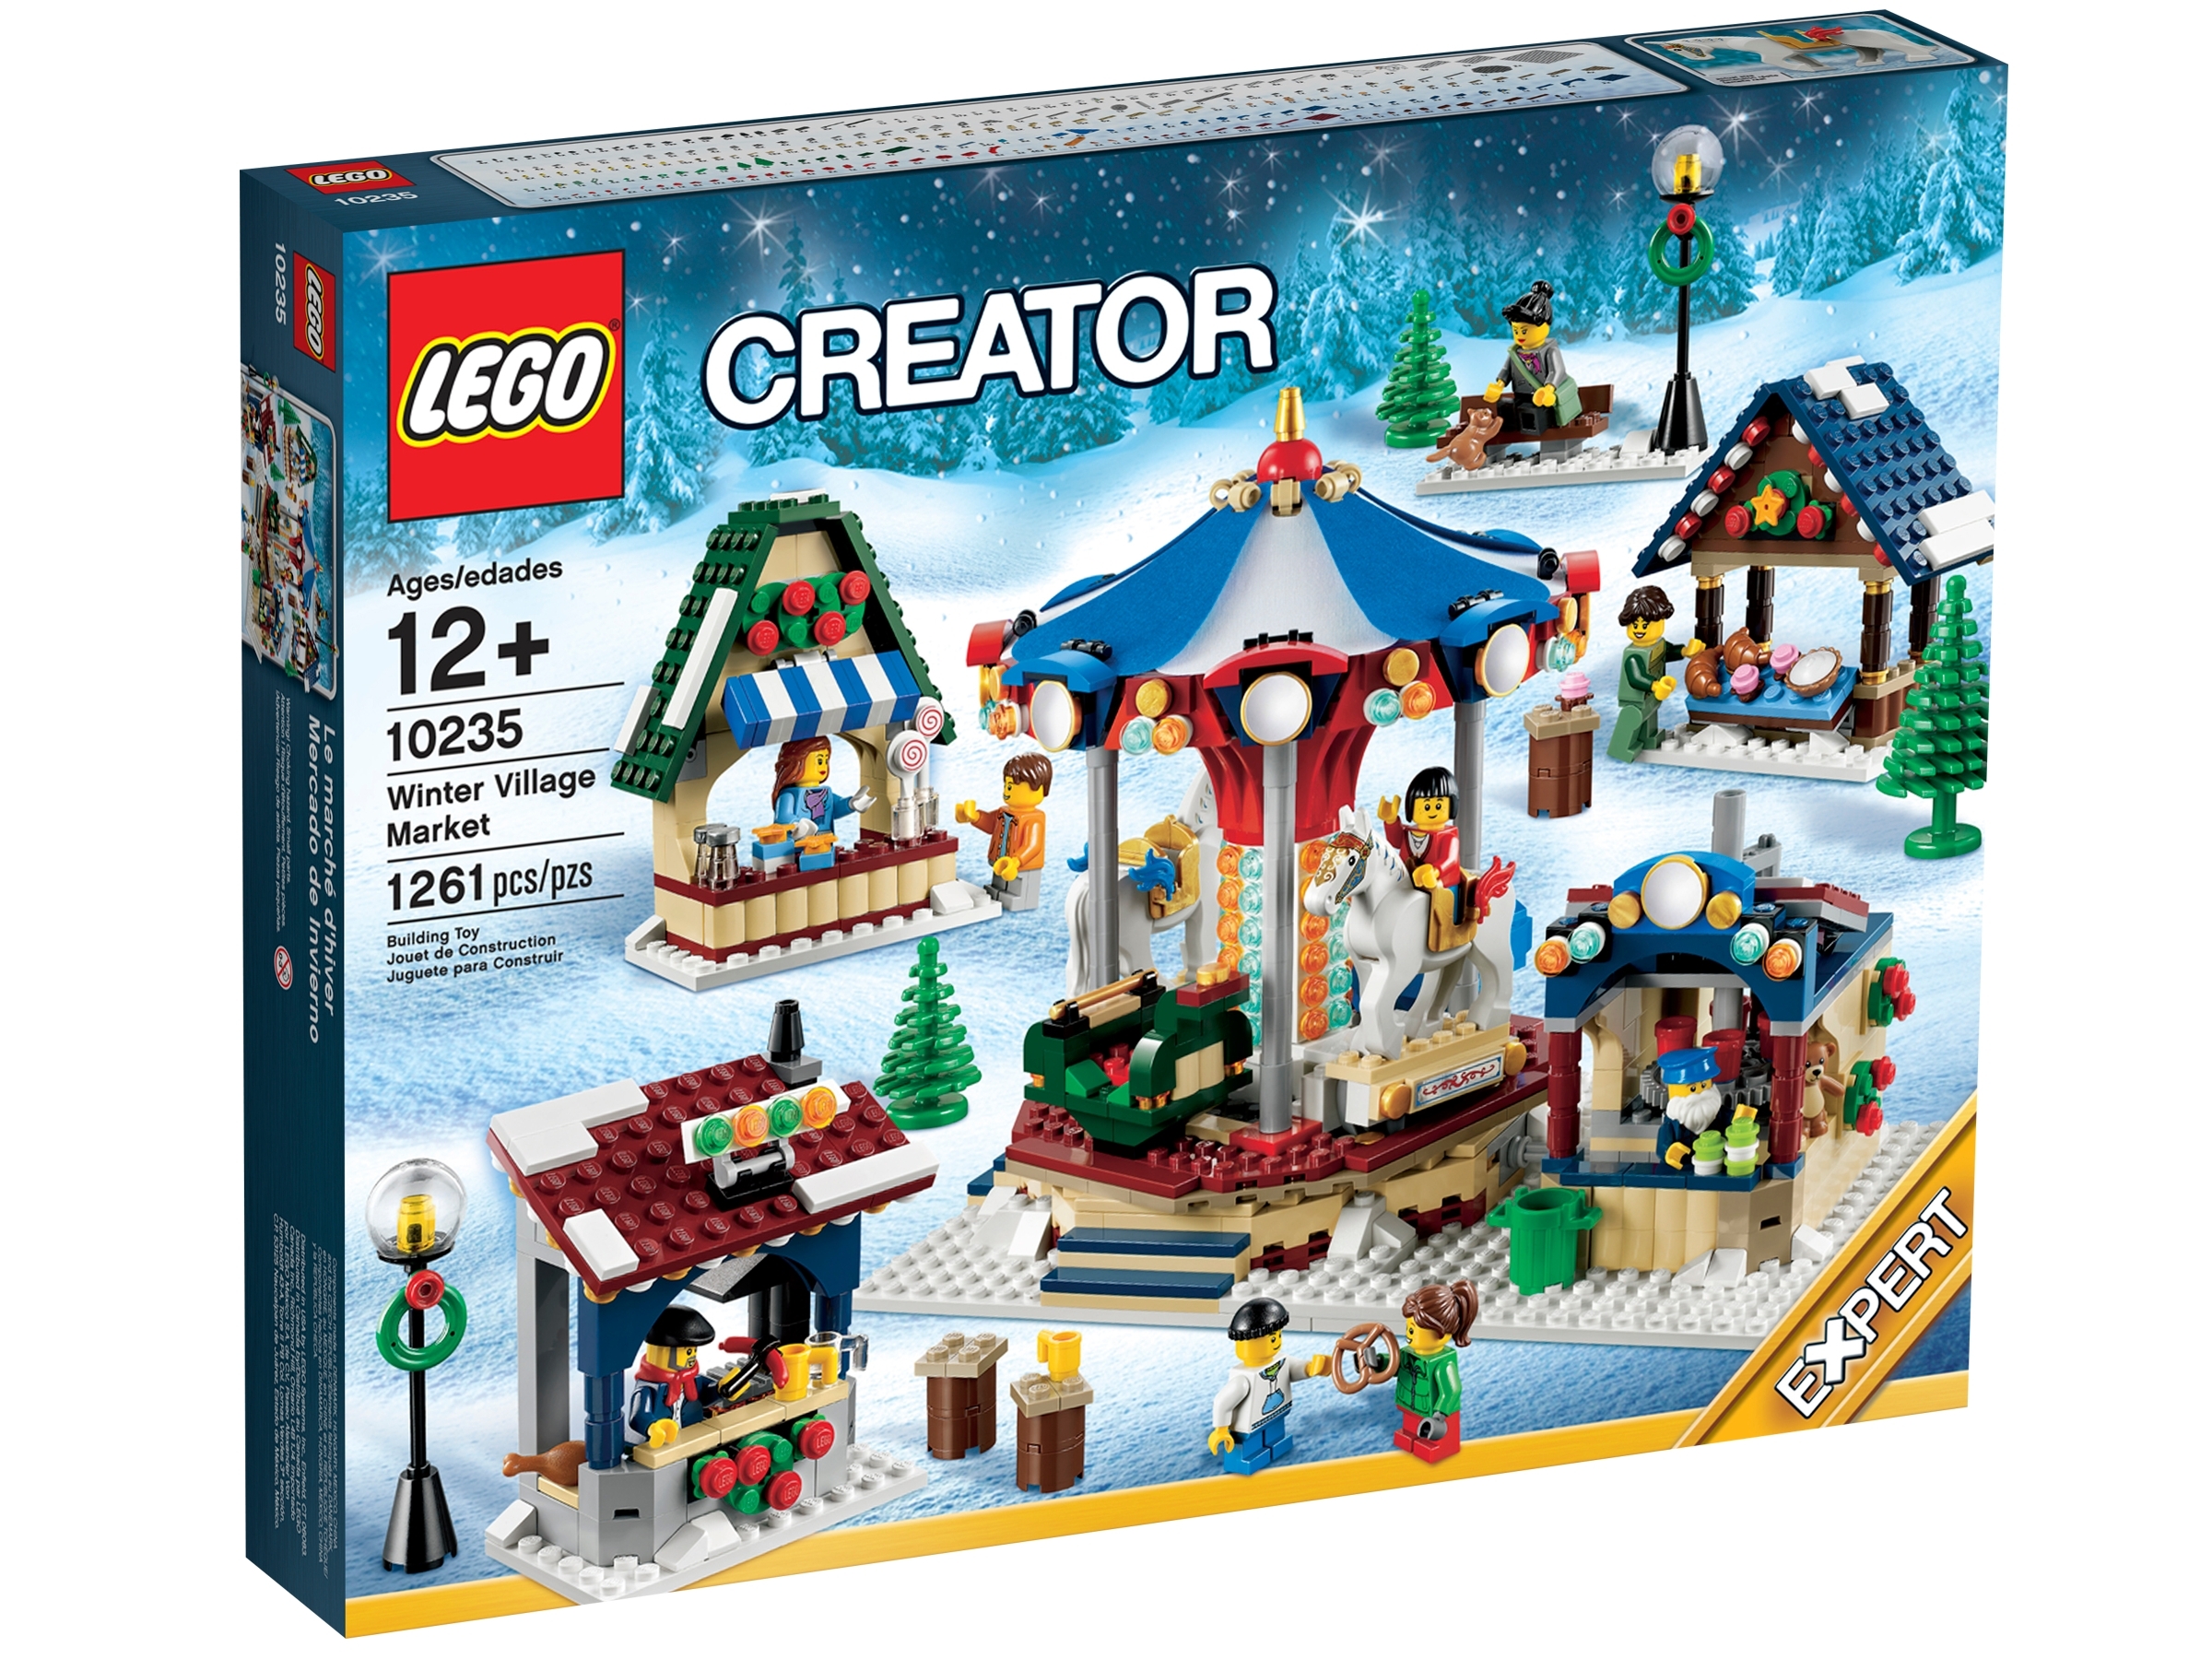 All Lego Winter Village Sets It contains 1490 pieces and is the fourth